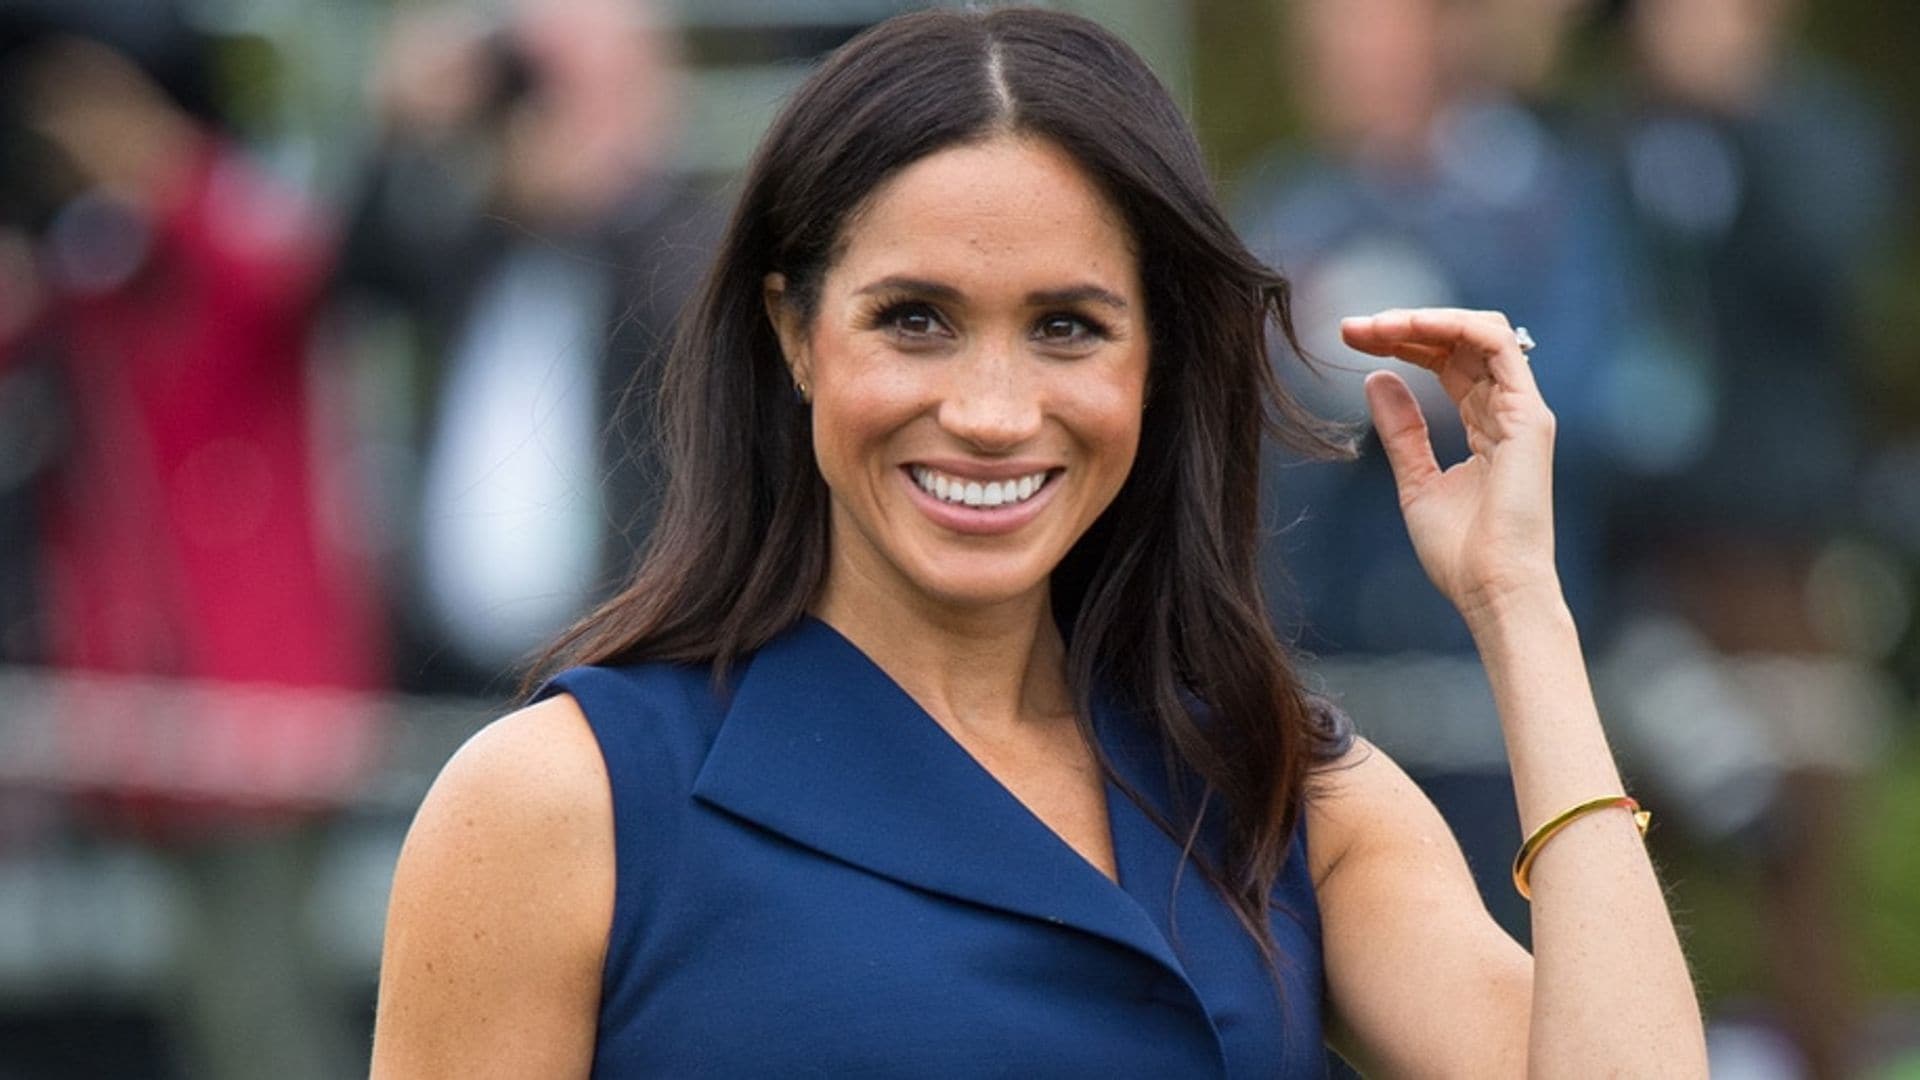 Meghan Markle to attend Lion King premiere, first red carpet since becoming royal